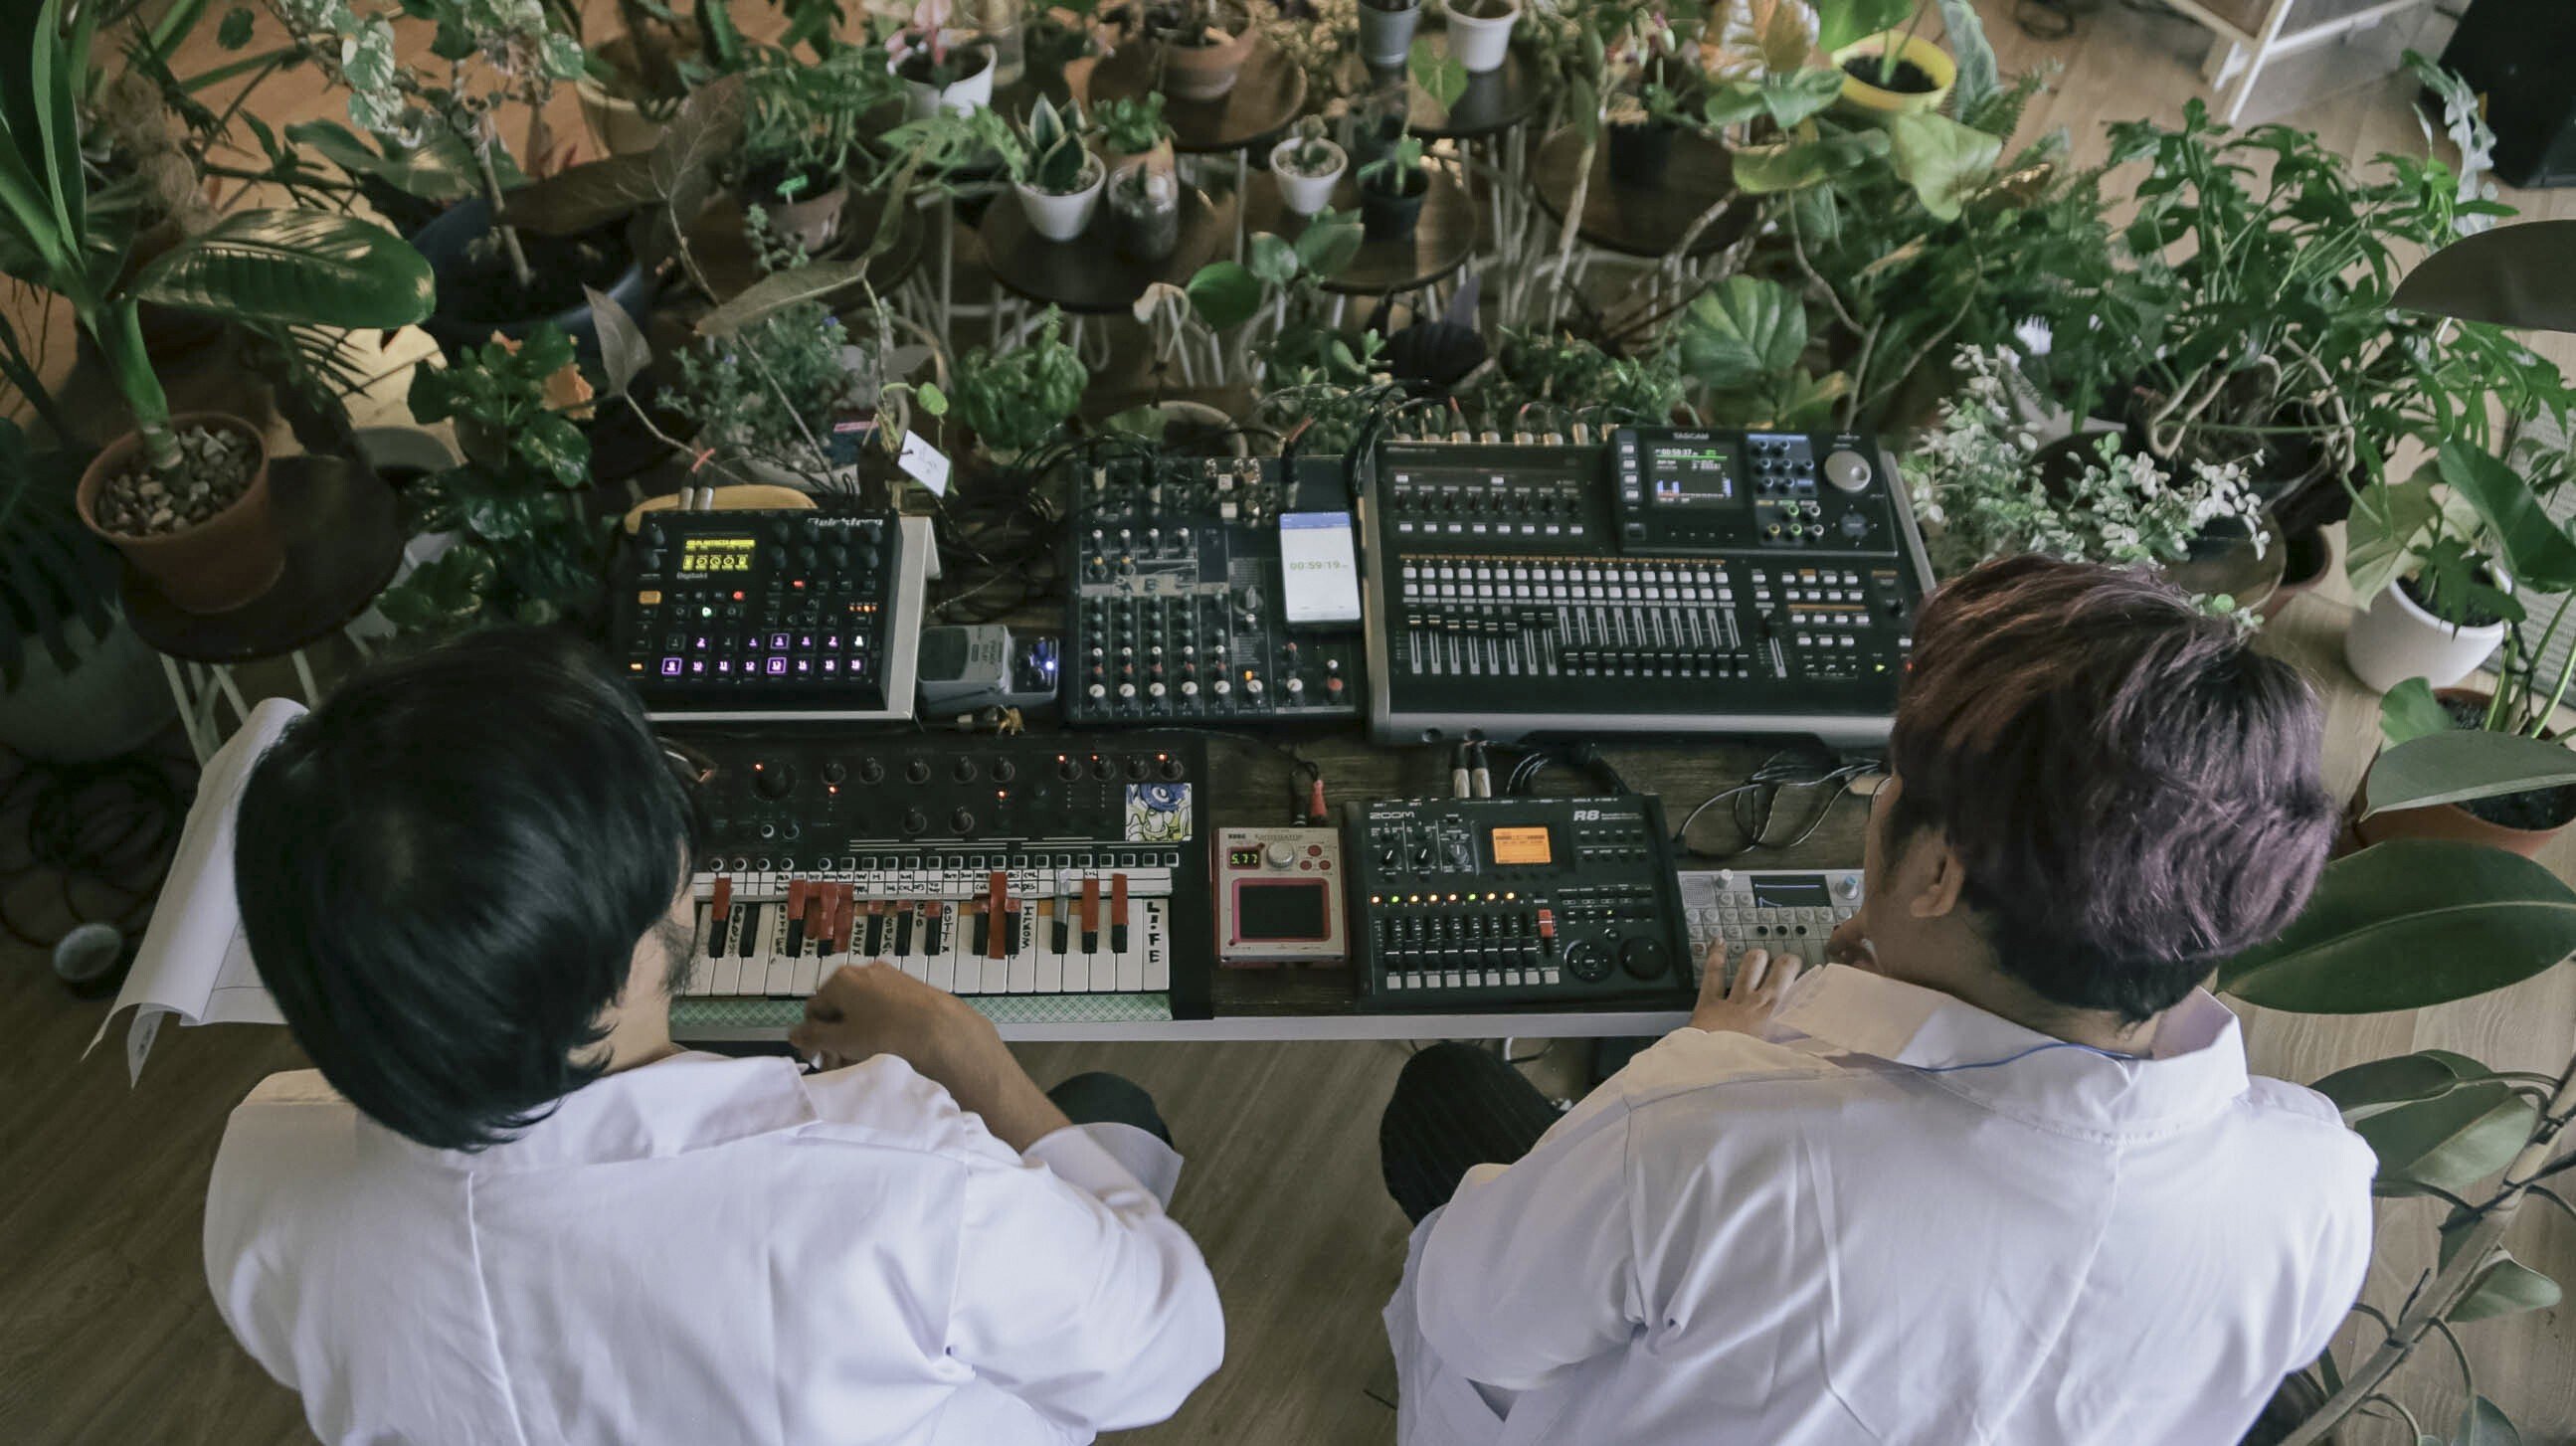 Indonesian electronic music group Bottlesmoker perform at the “Plantasia” concert in July to an audience of more than 150 house plants and their owners. Photo: Widian Lesmana